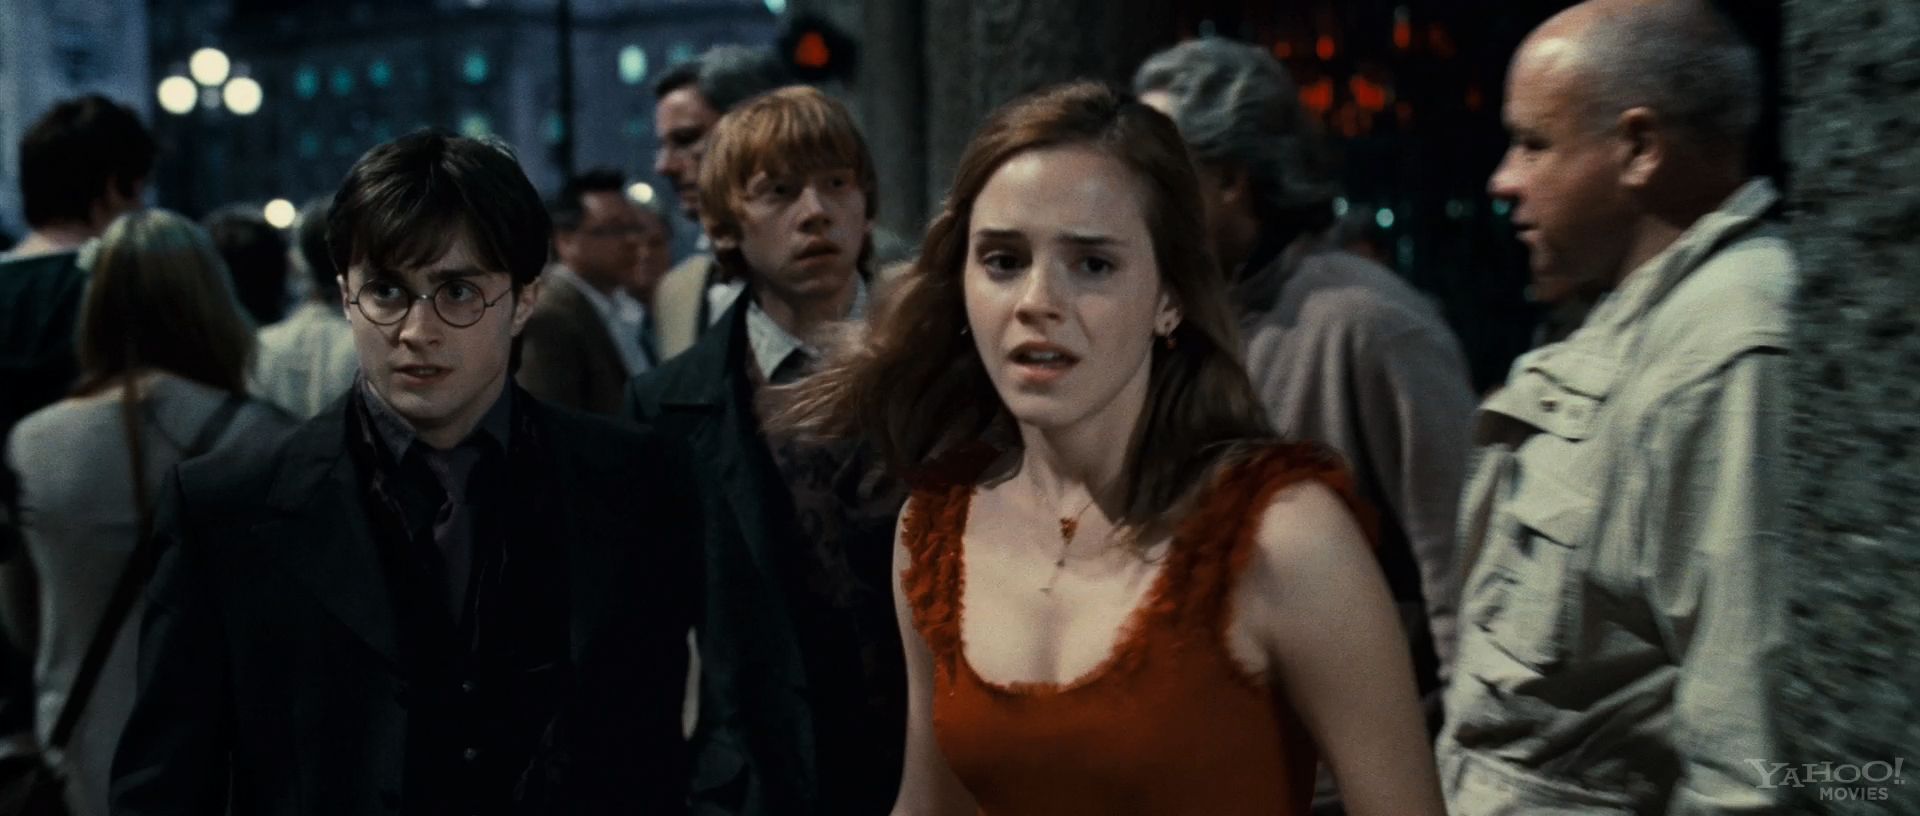 Harry Potter and the Deathly Hallow Trailer Still #6